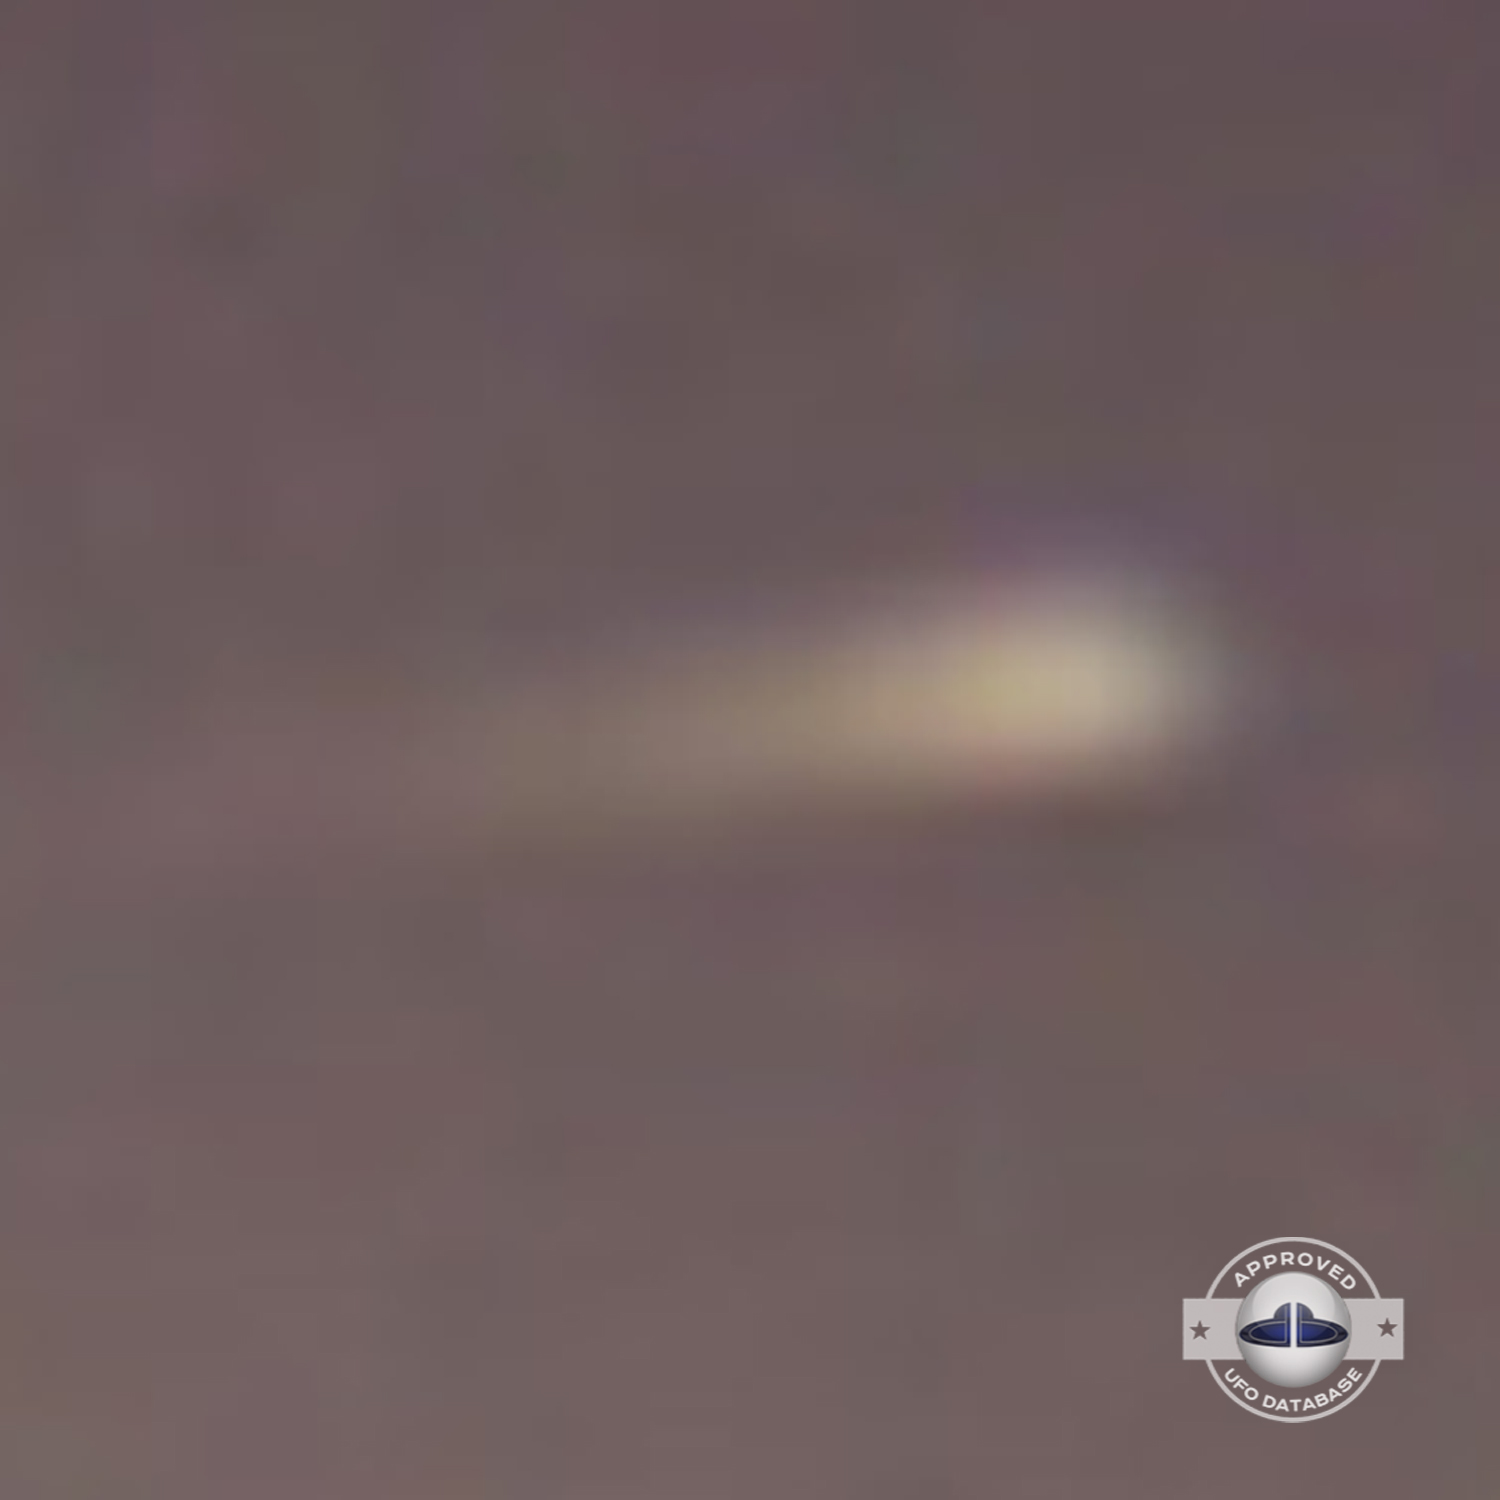 UFO flying over Uruguay in South America at night fall in 2008 UFO Picture #31-4